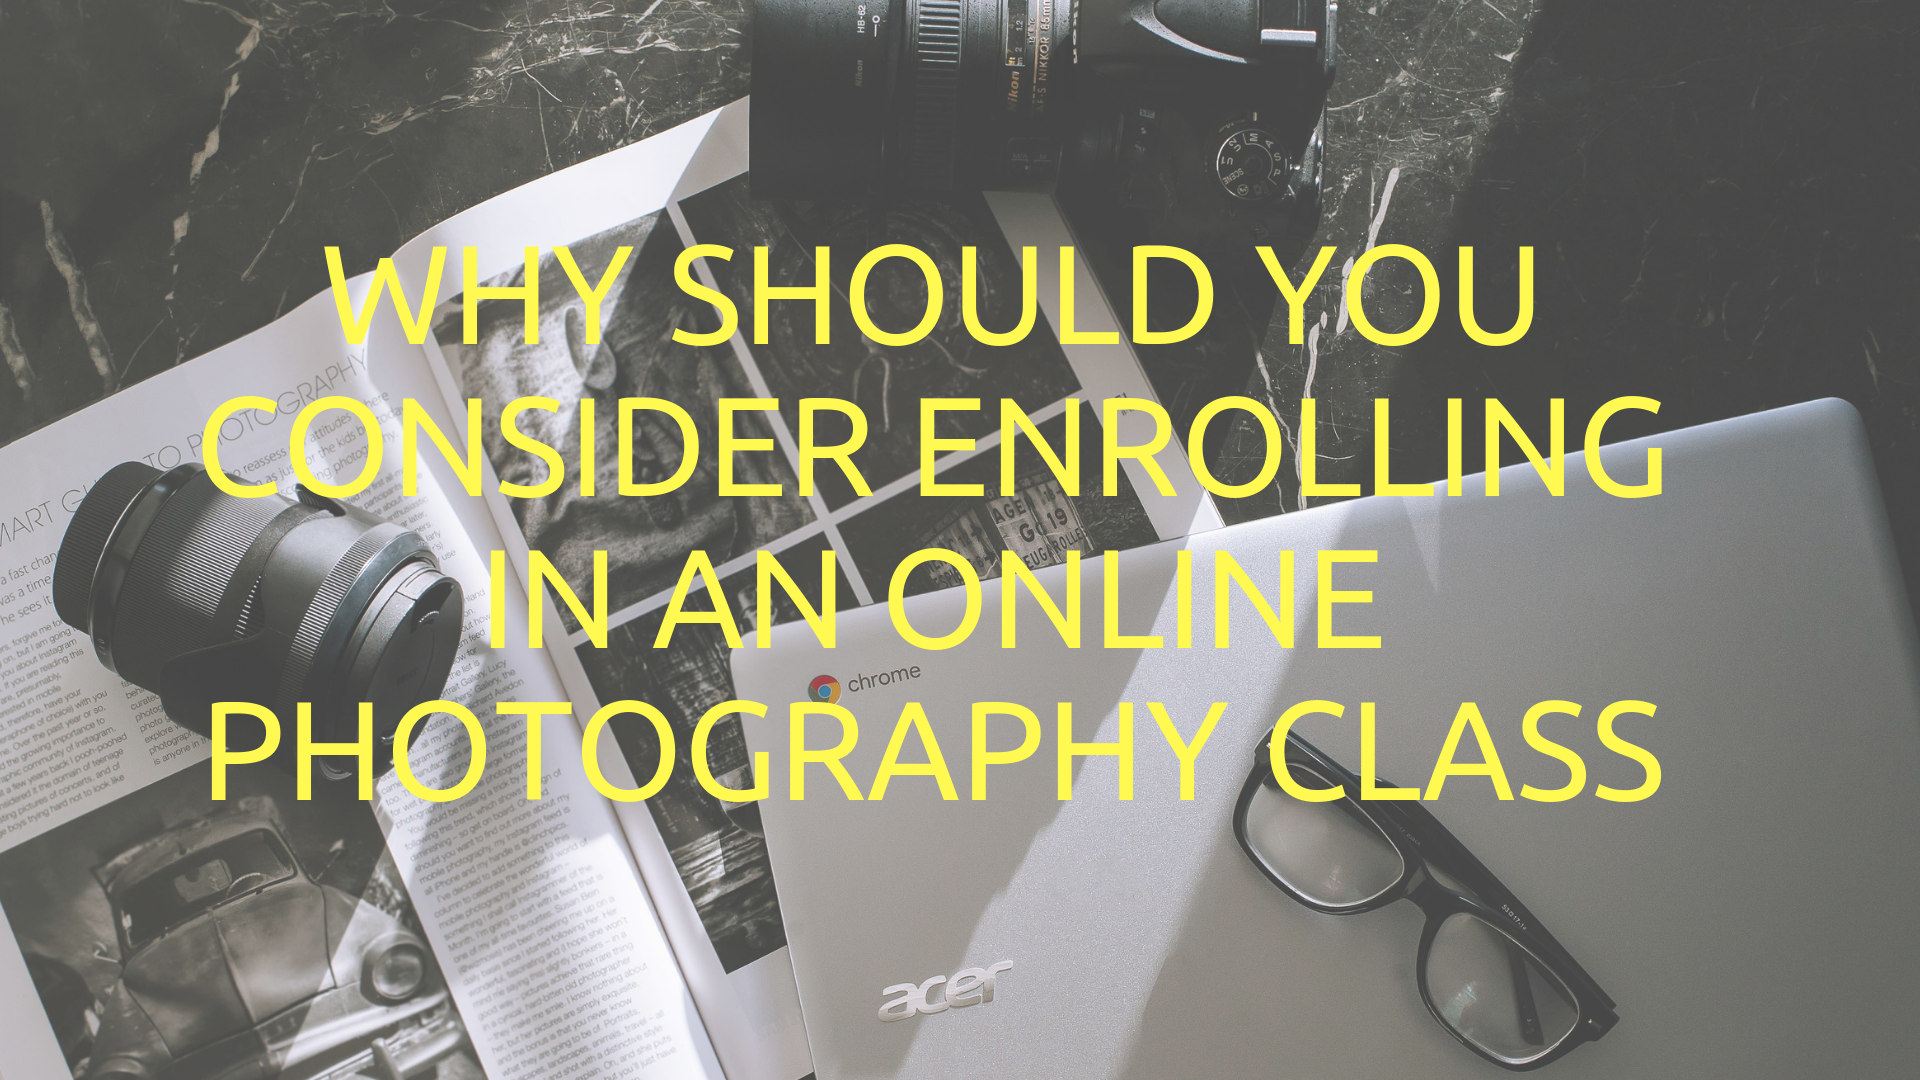 Why Should You Consider Enrolling in an Online Photography Class